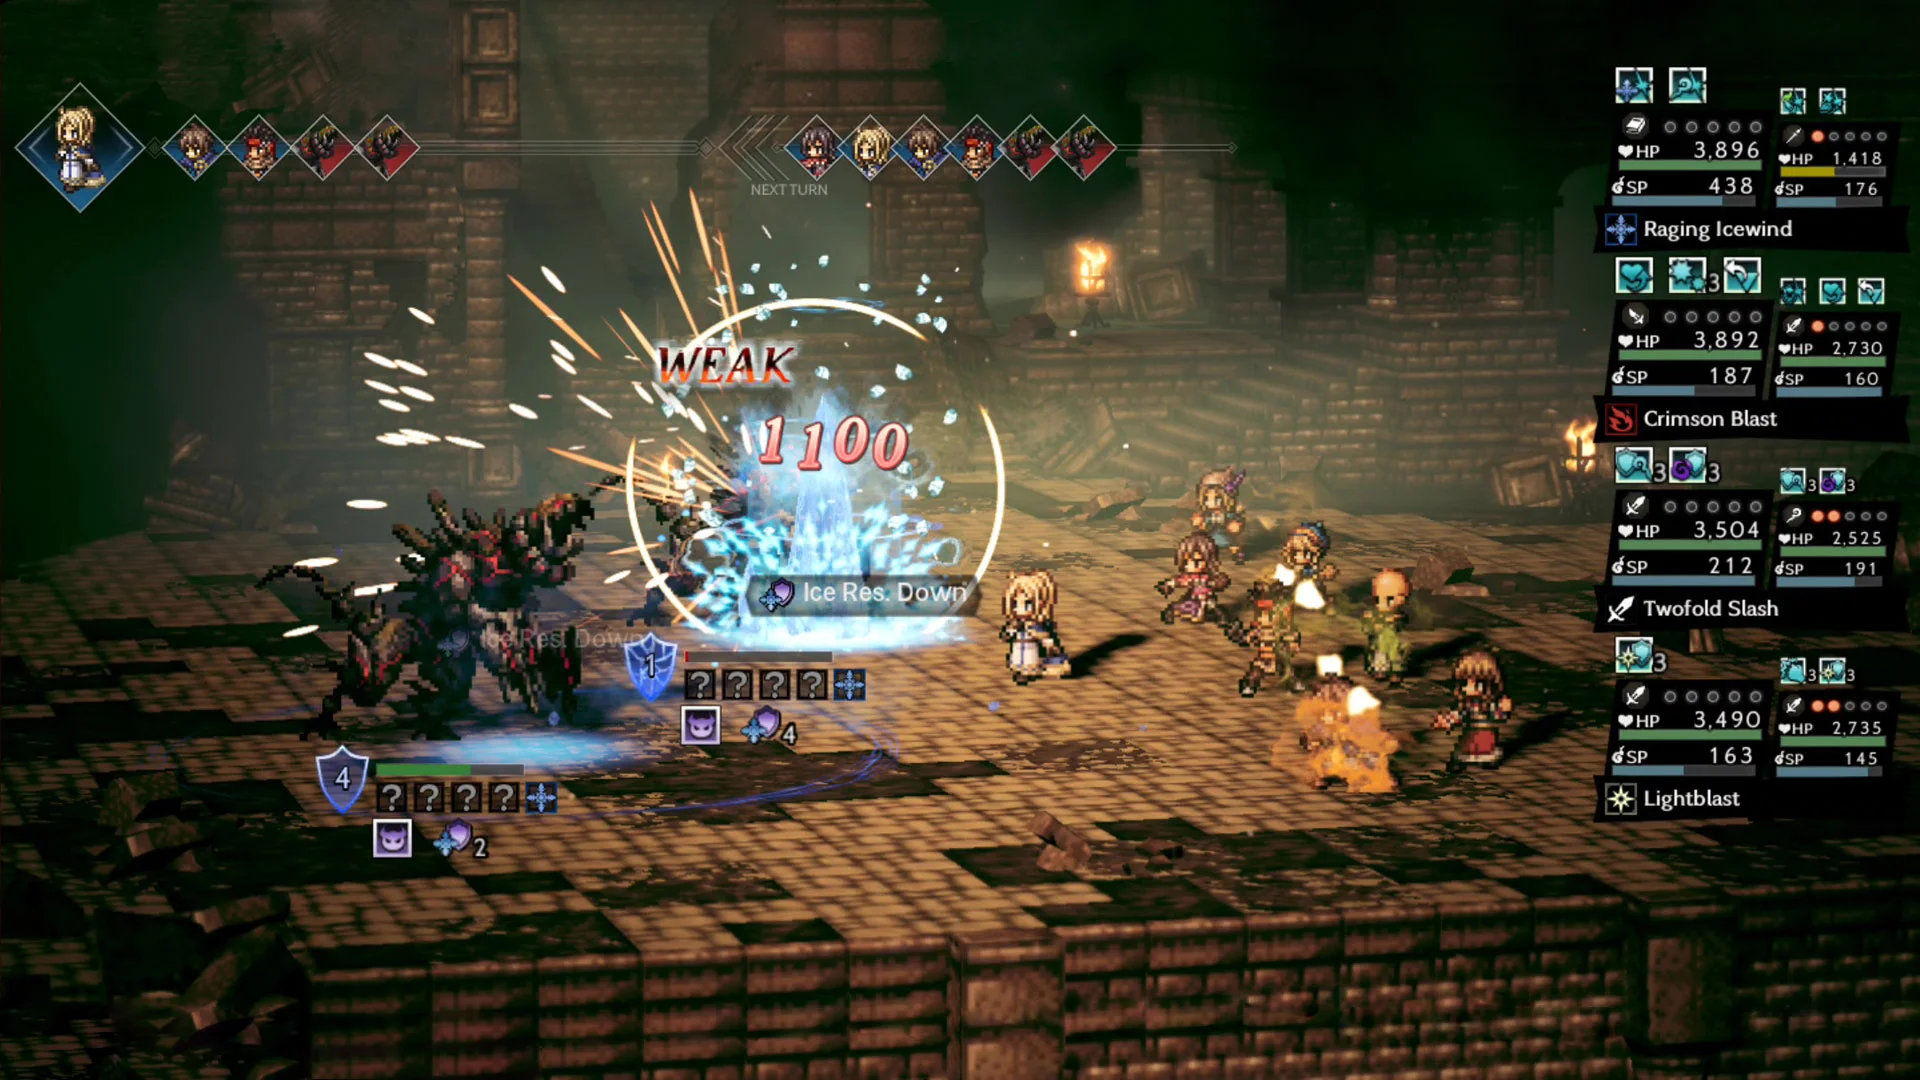 Is Octopath Traveler 2 Coming to Xbox Game Pass? - GameRevolution